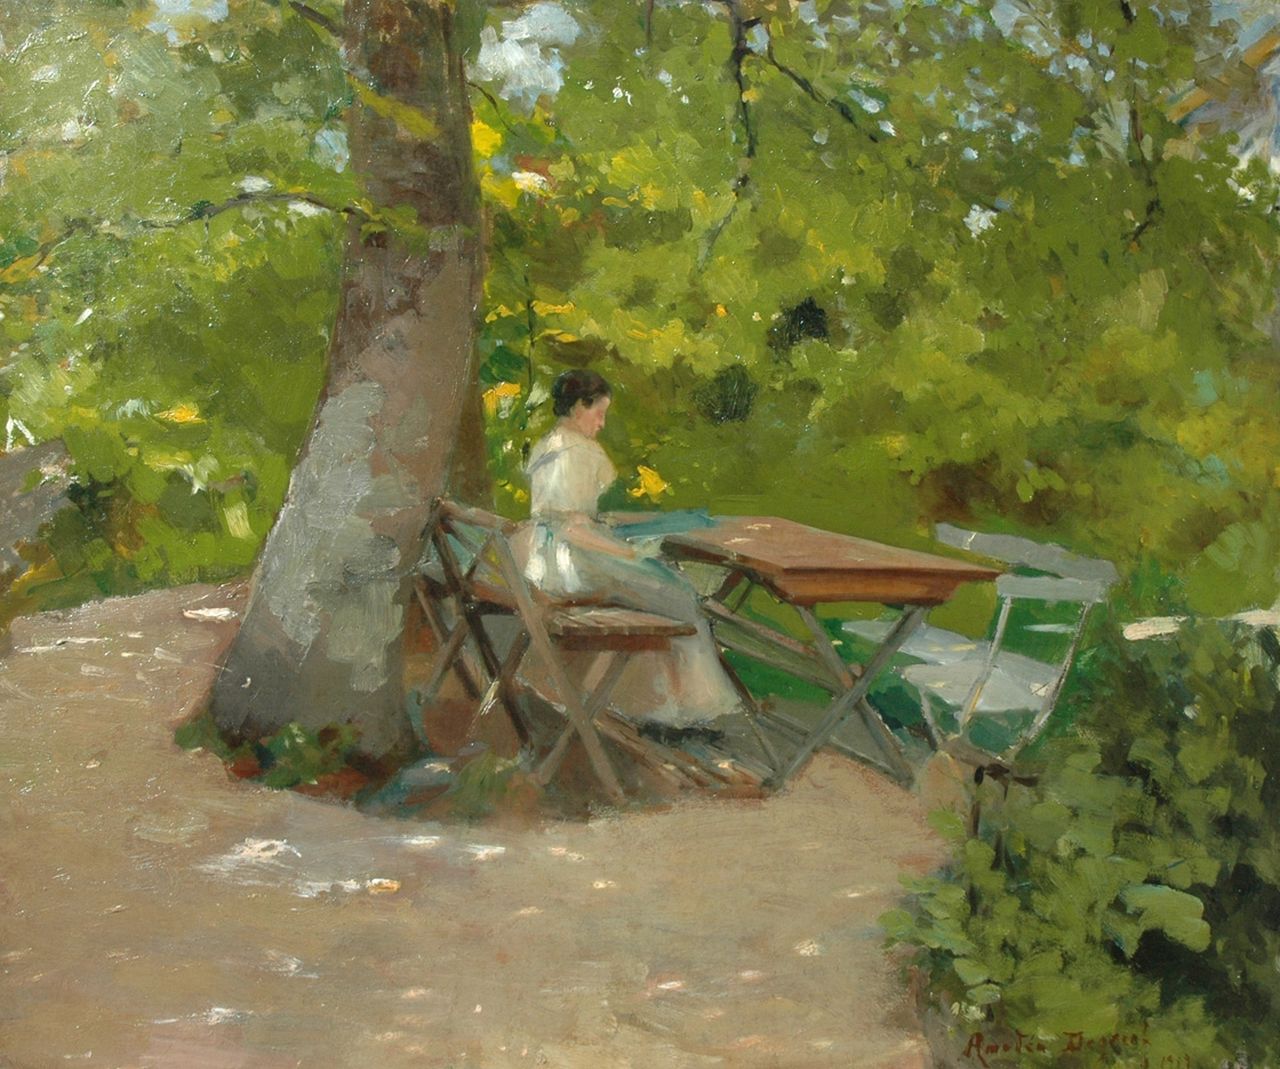 Degreef A.  | Amédée Degreef, A young woman reading in the garden, Öl auf Leinwand 50,4 x 60,2 cm, signed l.r. und dated 1919